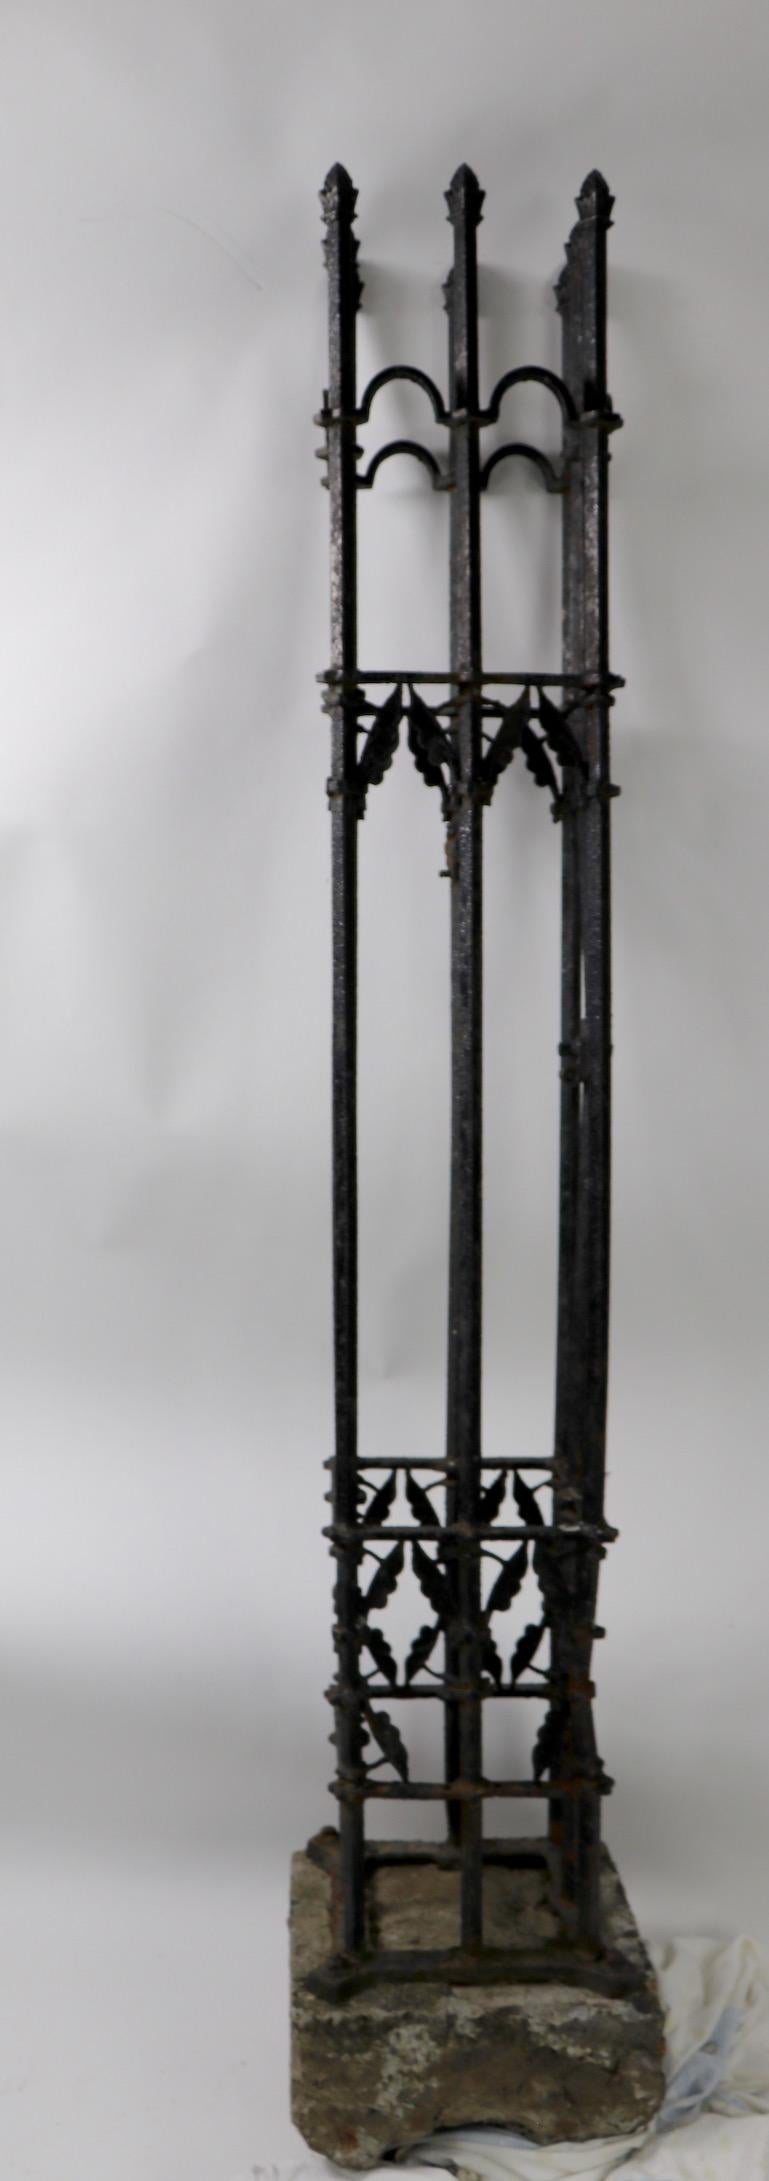 Victorian Aesthetic Movement cast iron fence post having four vertical elements jointed by square iron structural elements. The cast iron post is attached to original cast stone base, which can be set in the ground to display decorative iron post.